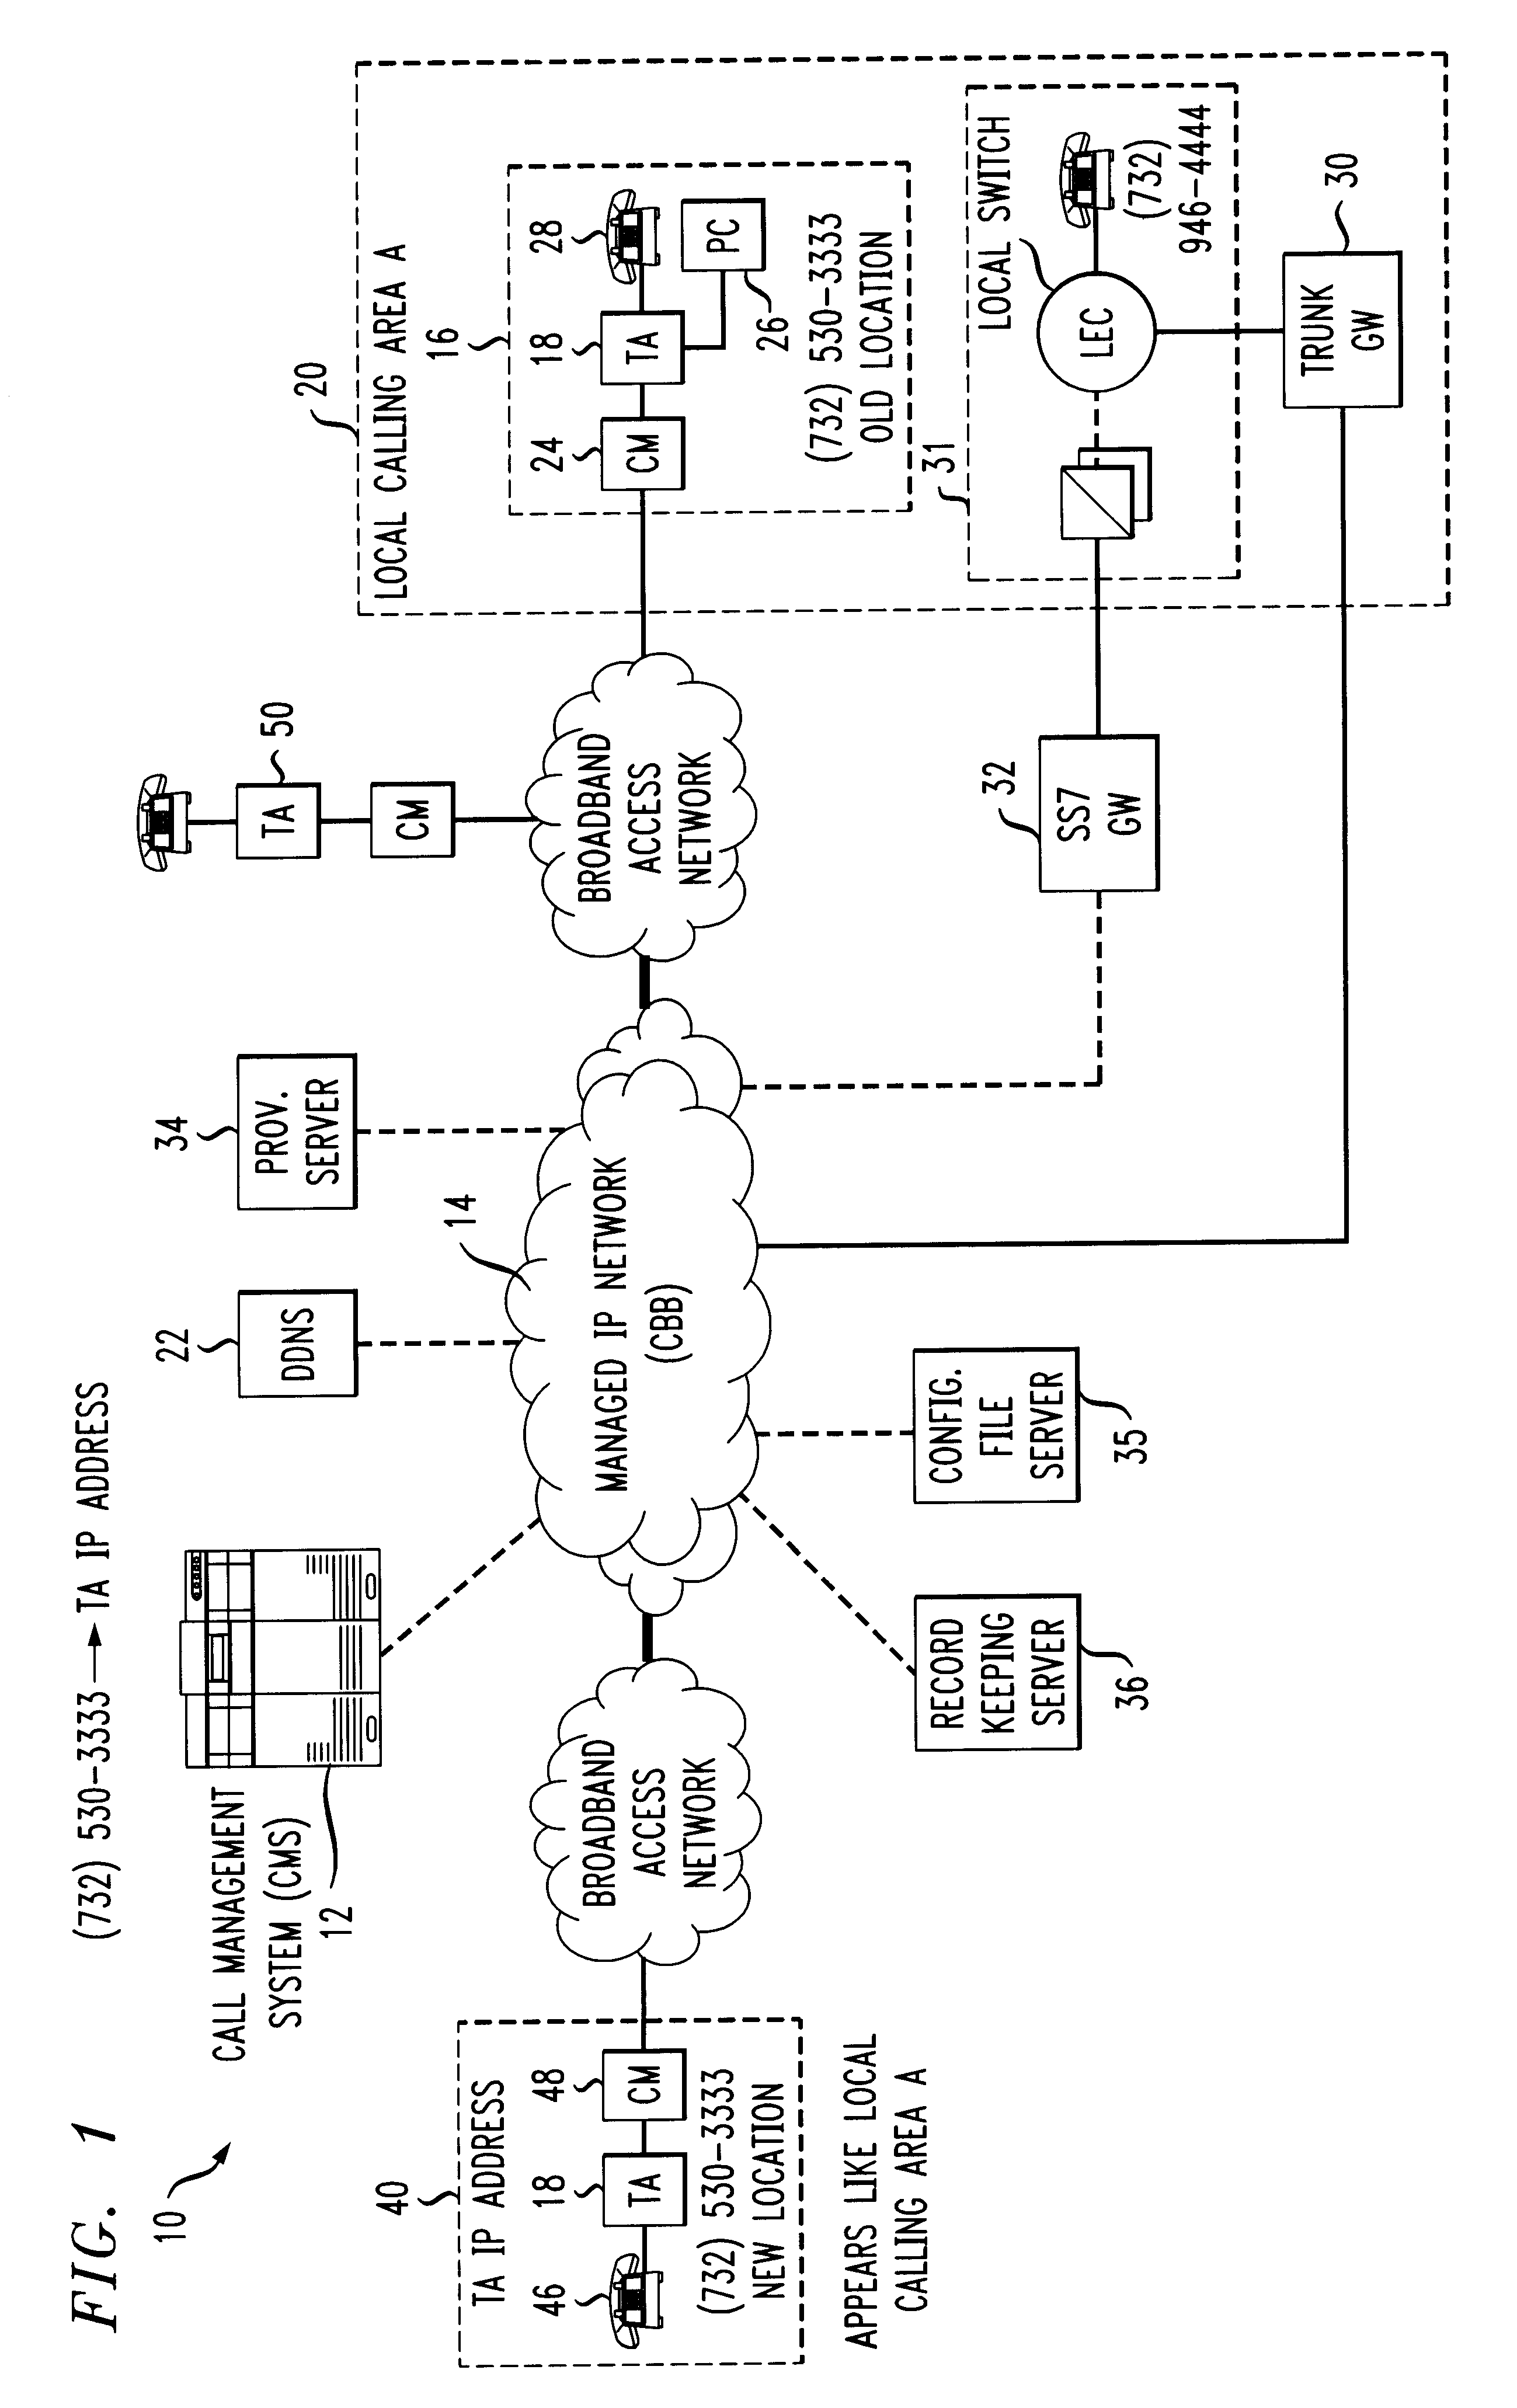 Self-installable and portable voice telecommunication service